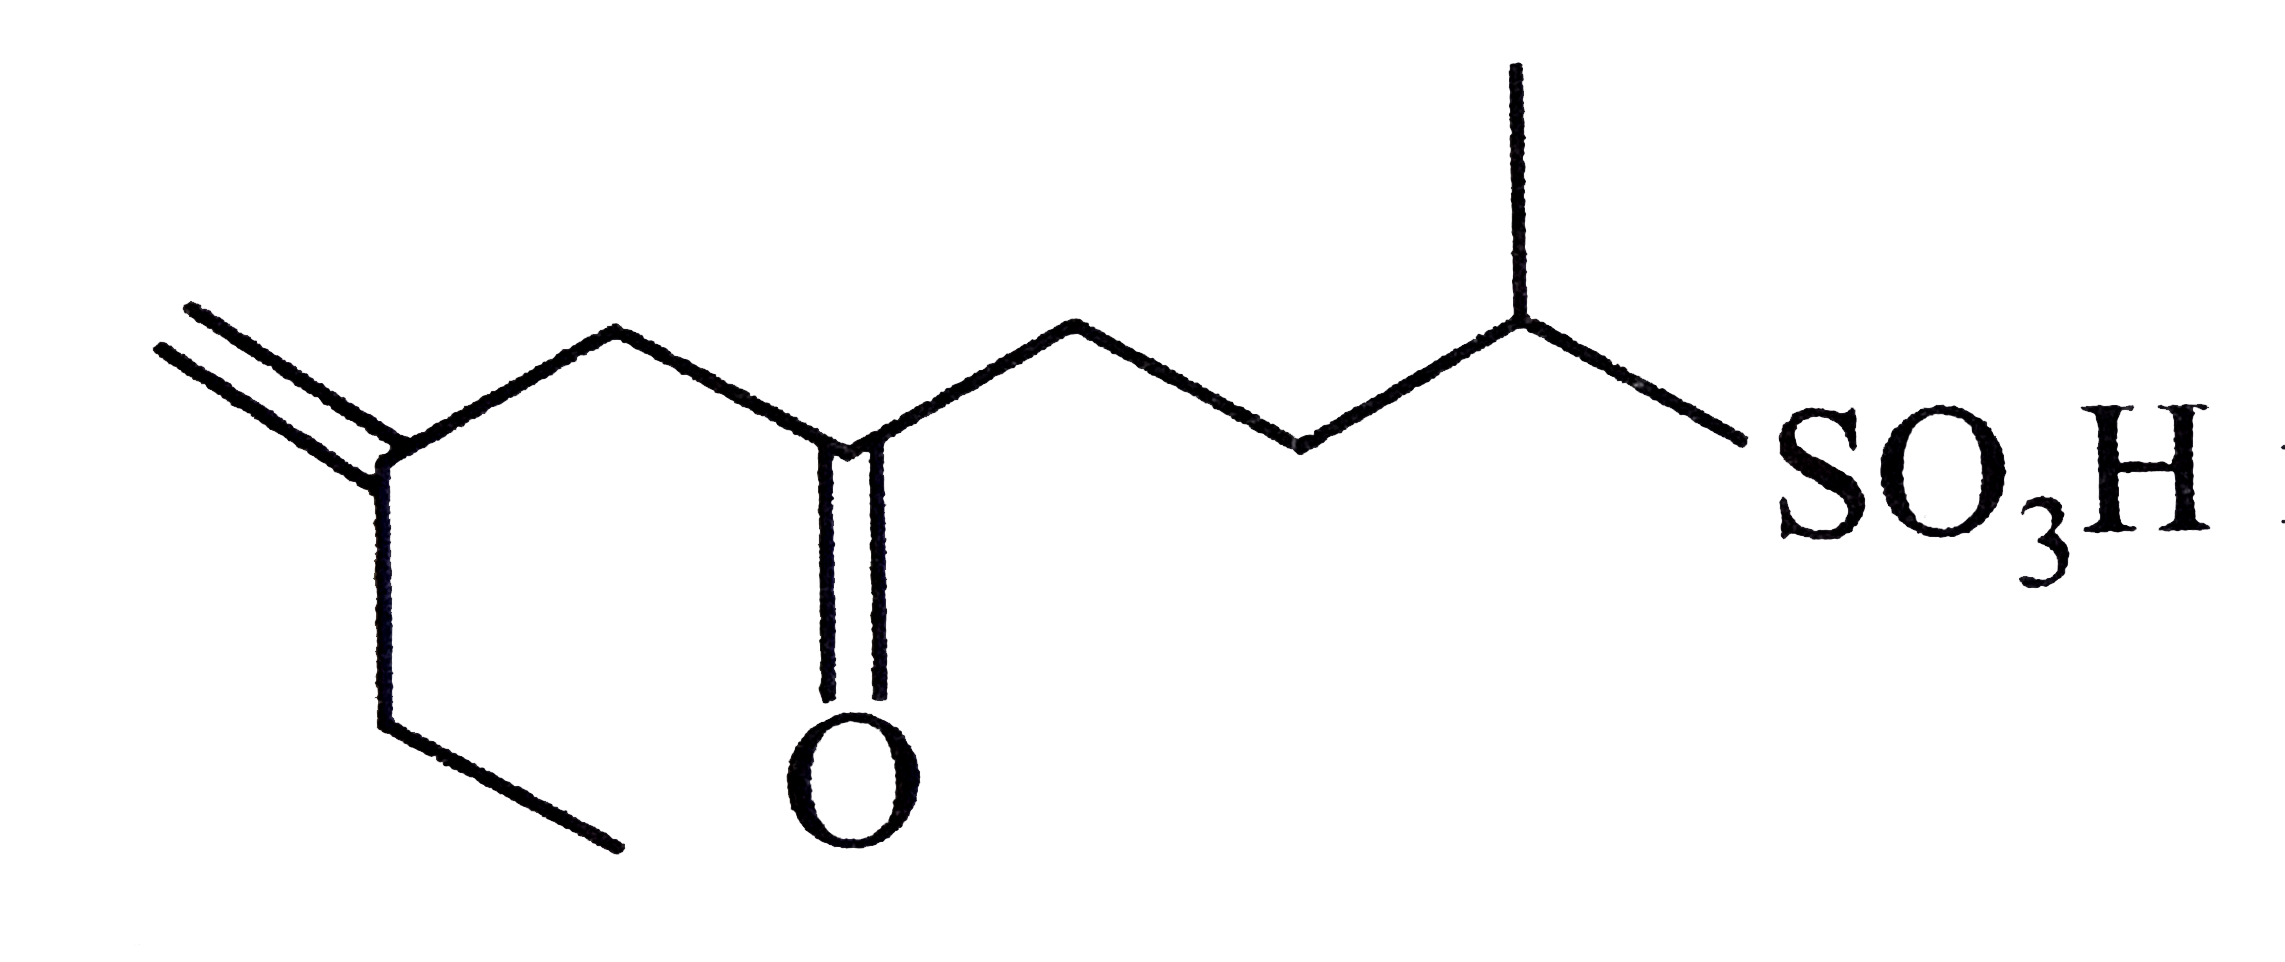 The correct IUPAC name of the compound     is: